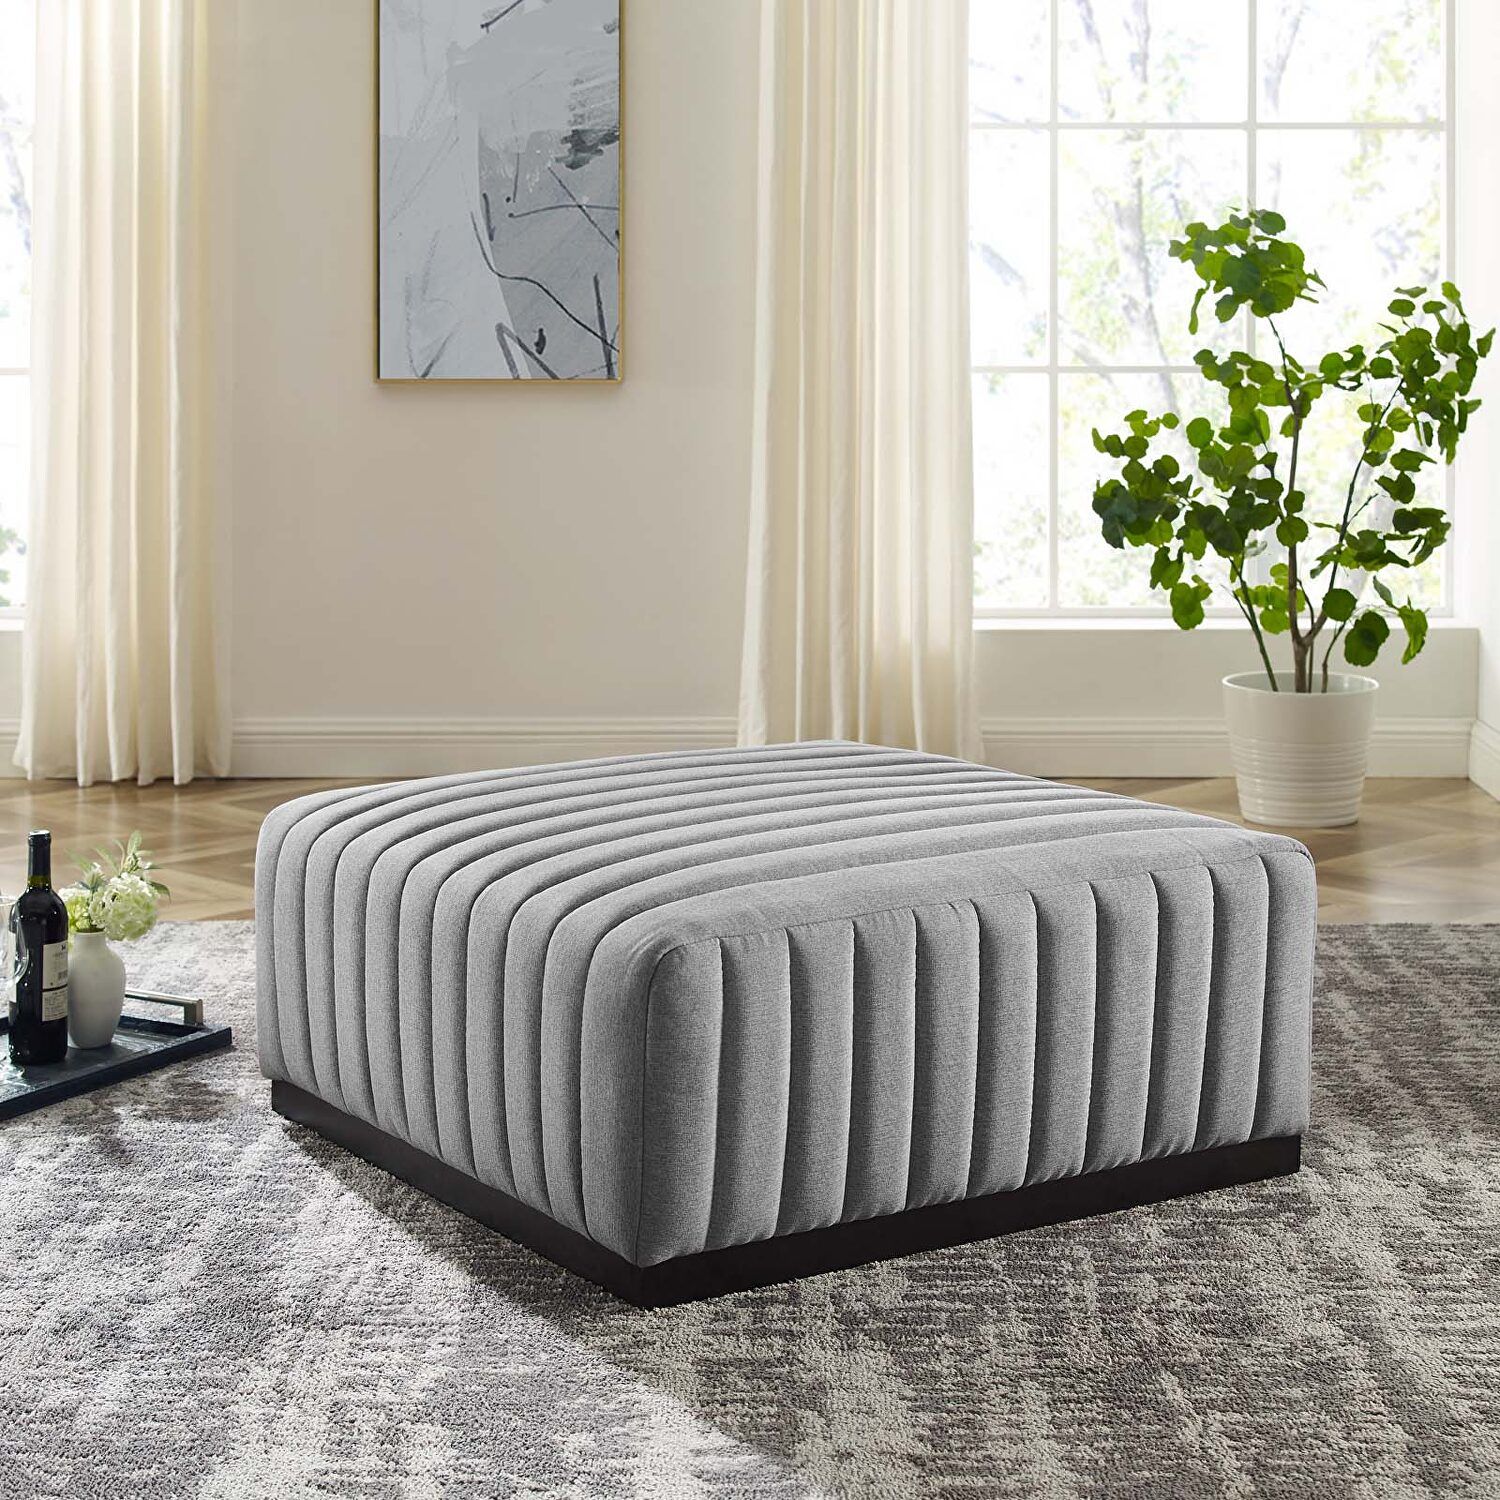 Modway Conjure Light Gray Ottoman Eei 5501 Blk Lgr | Comfyco With Regard To Light Gray Ottomans (View 2 of 15)